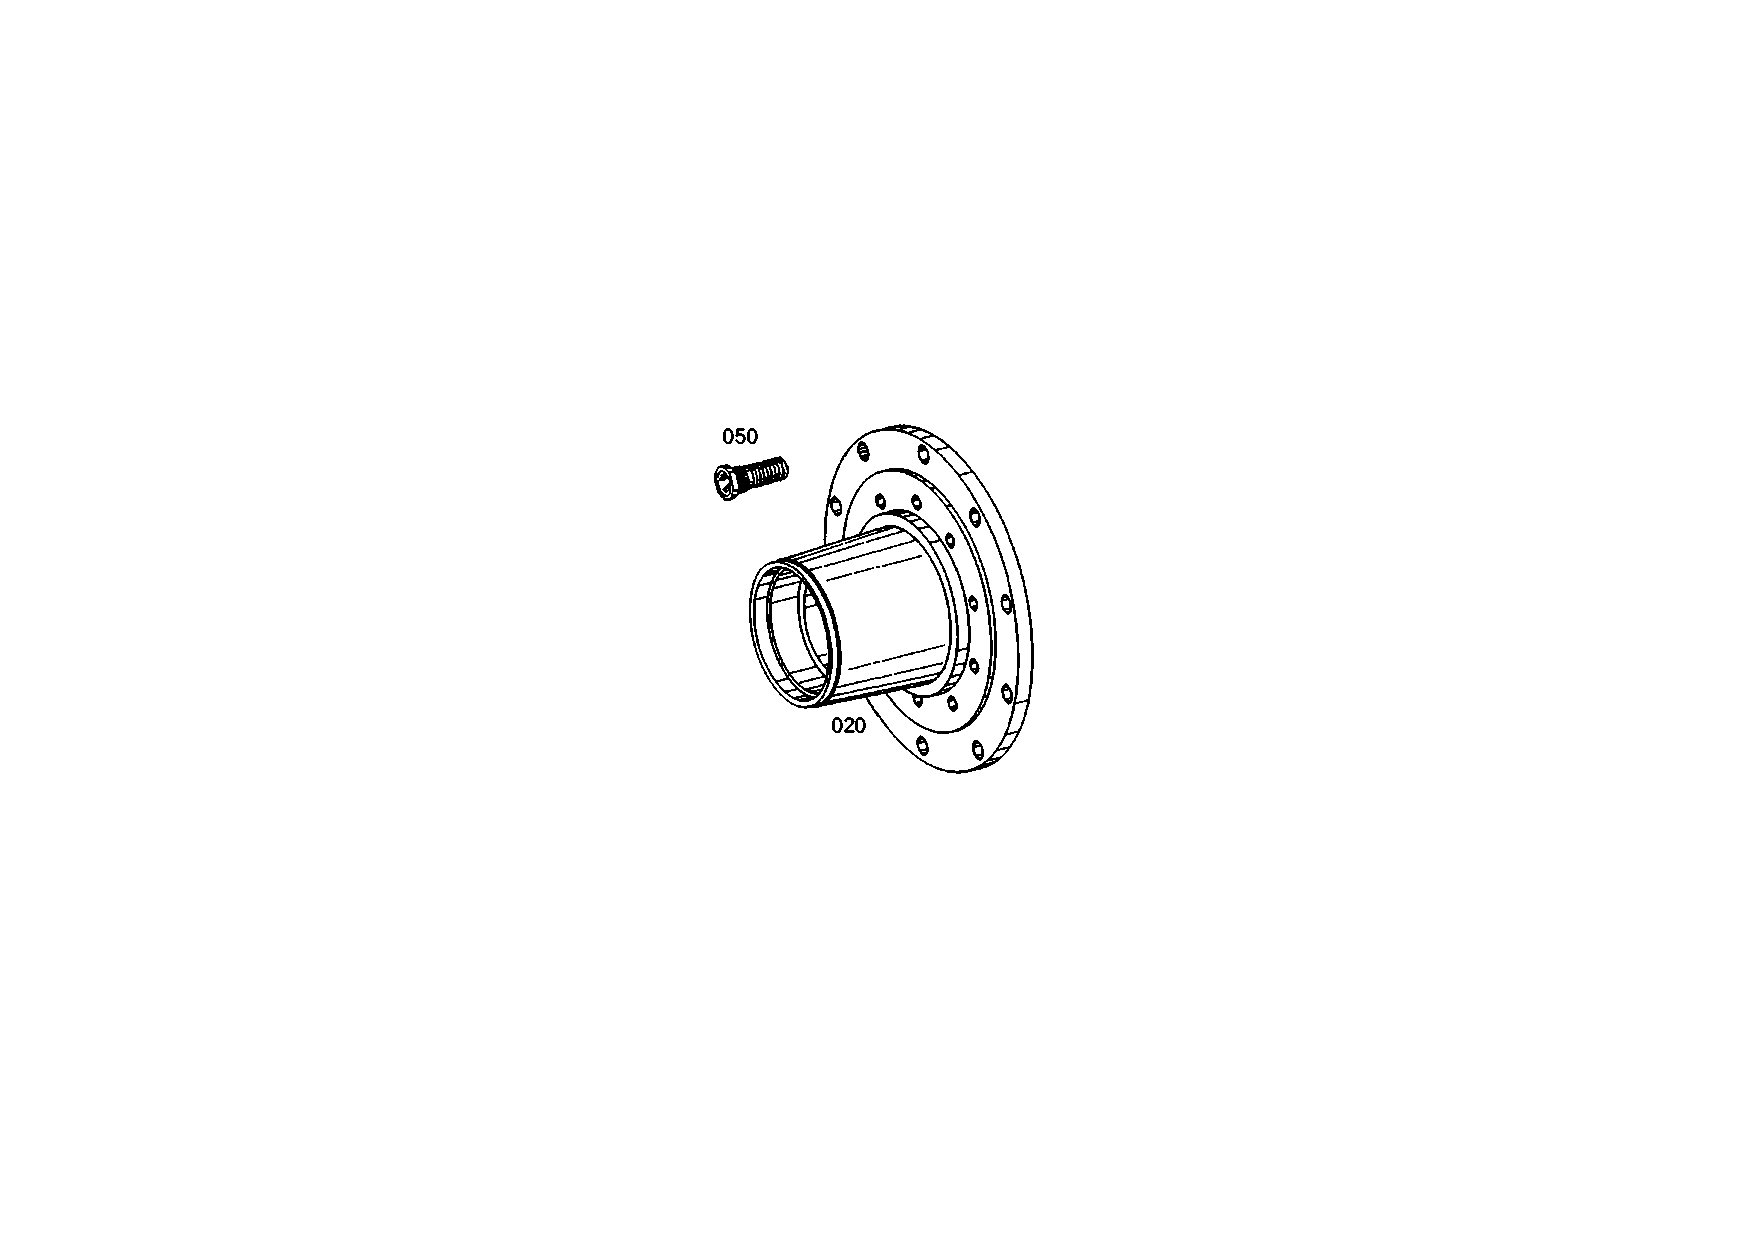 drawing for E. N. M. T. P. / CPG (520304008) - WHEEL STUD (figure 3)